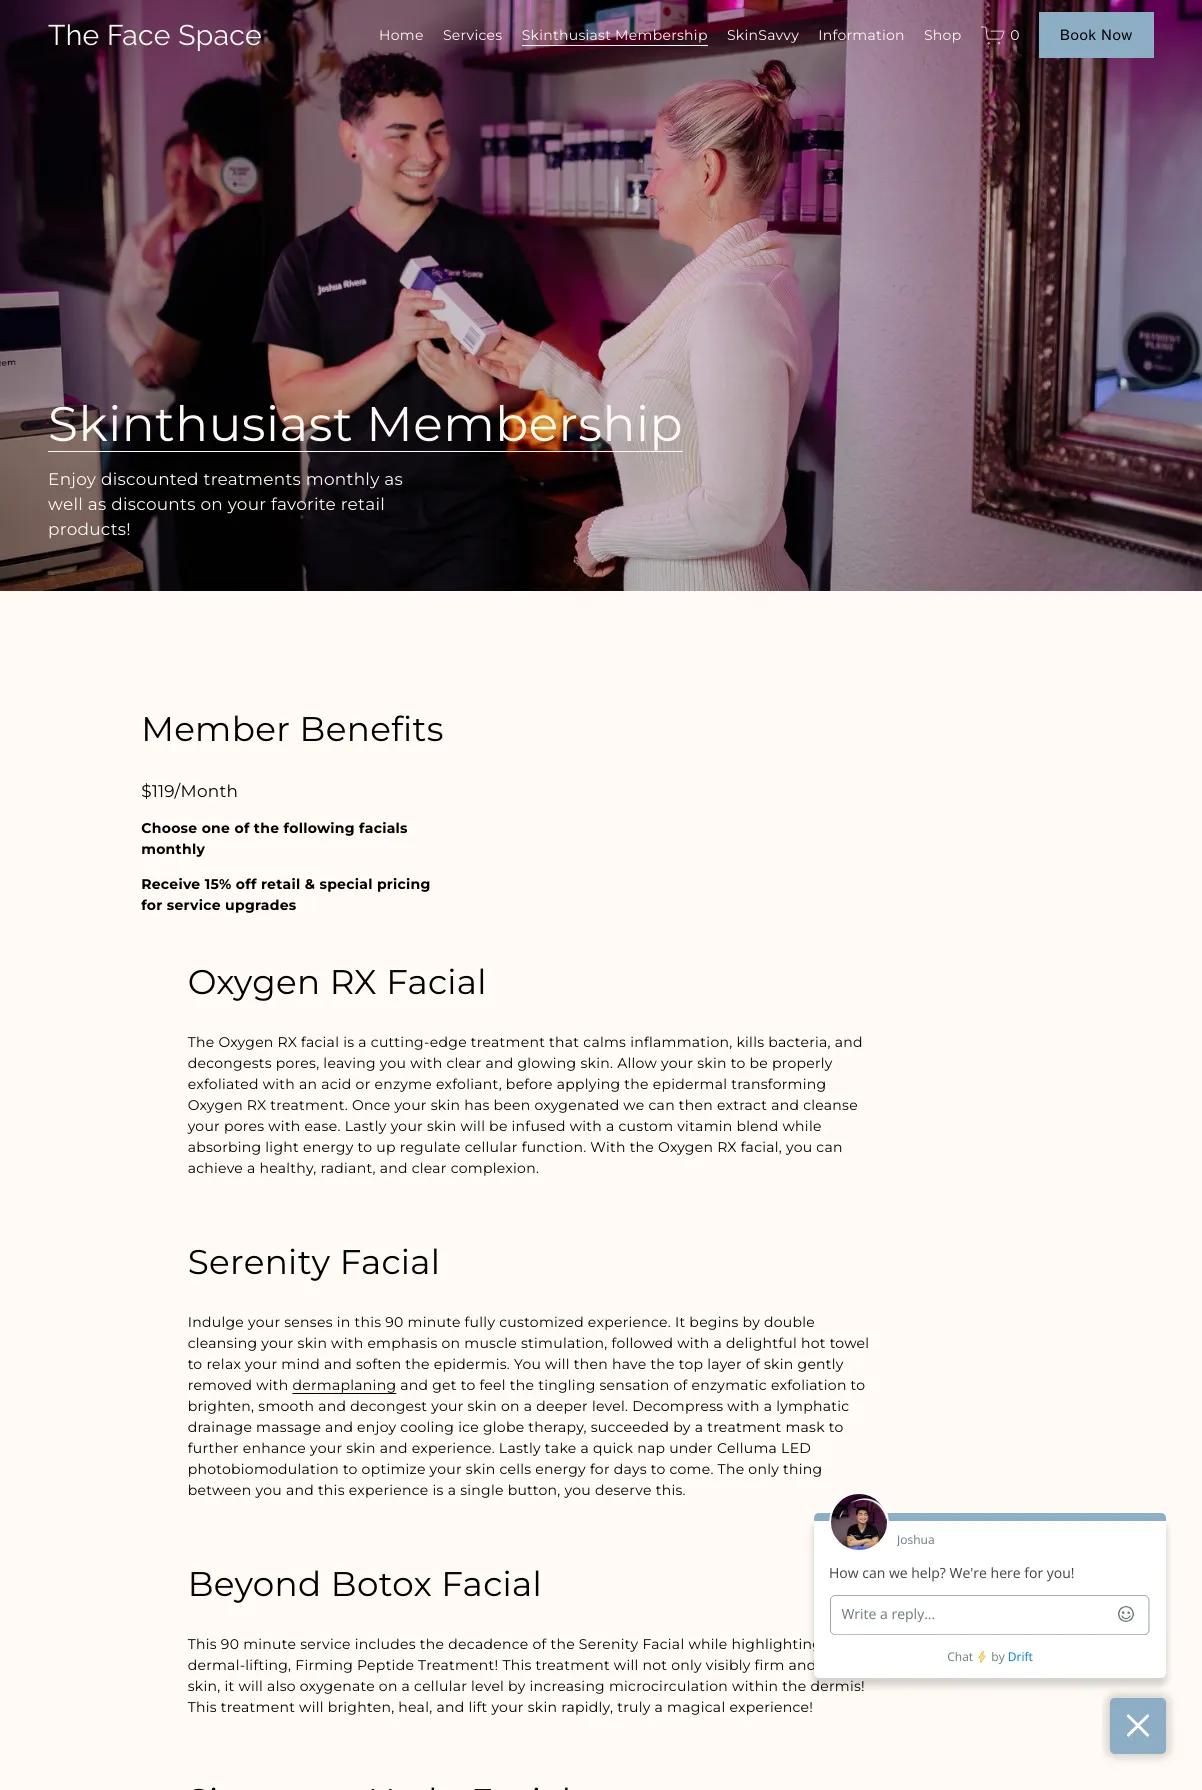 Screenshot 3 of The Face Space (Example Squarespace Esthetician Website)